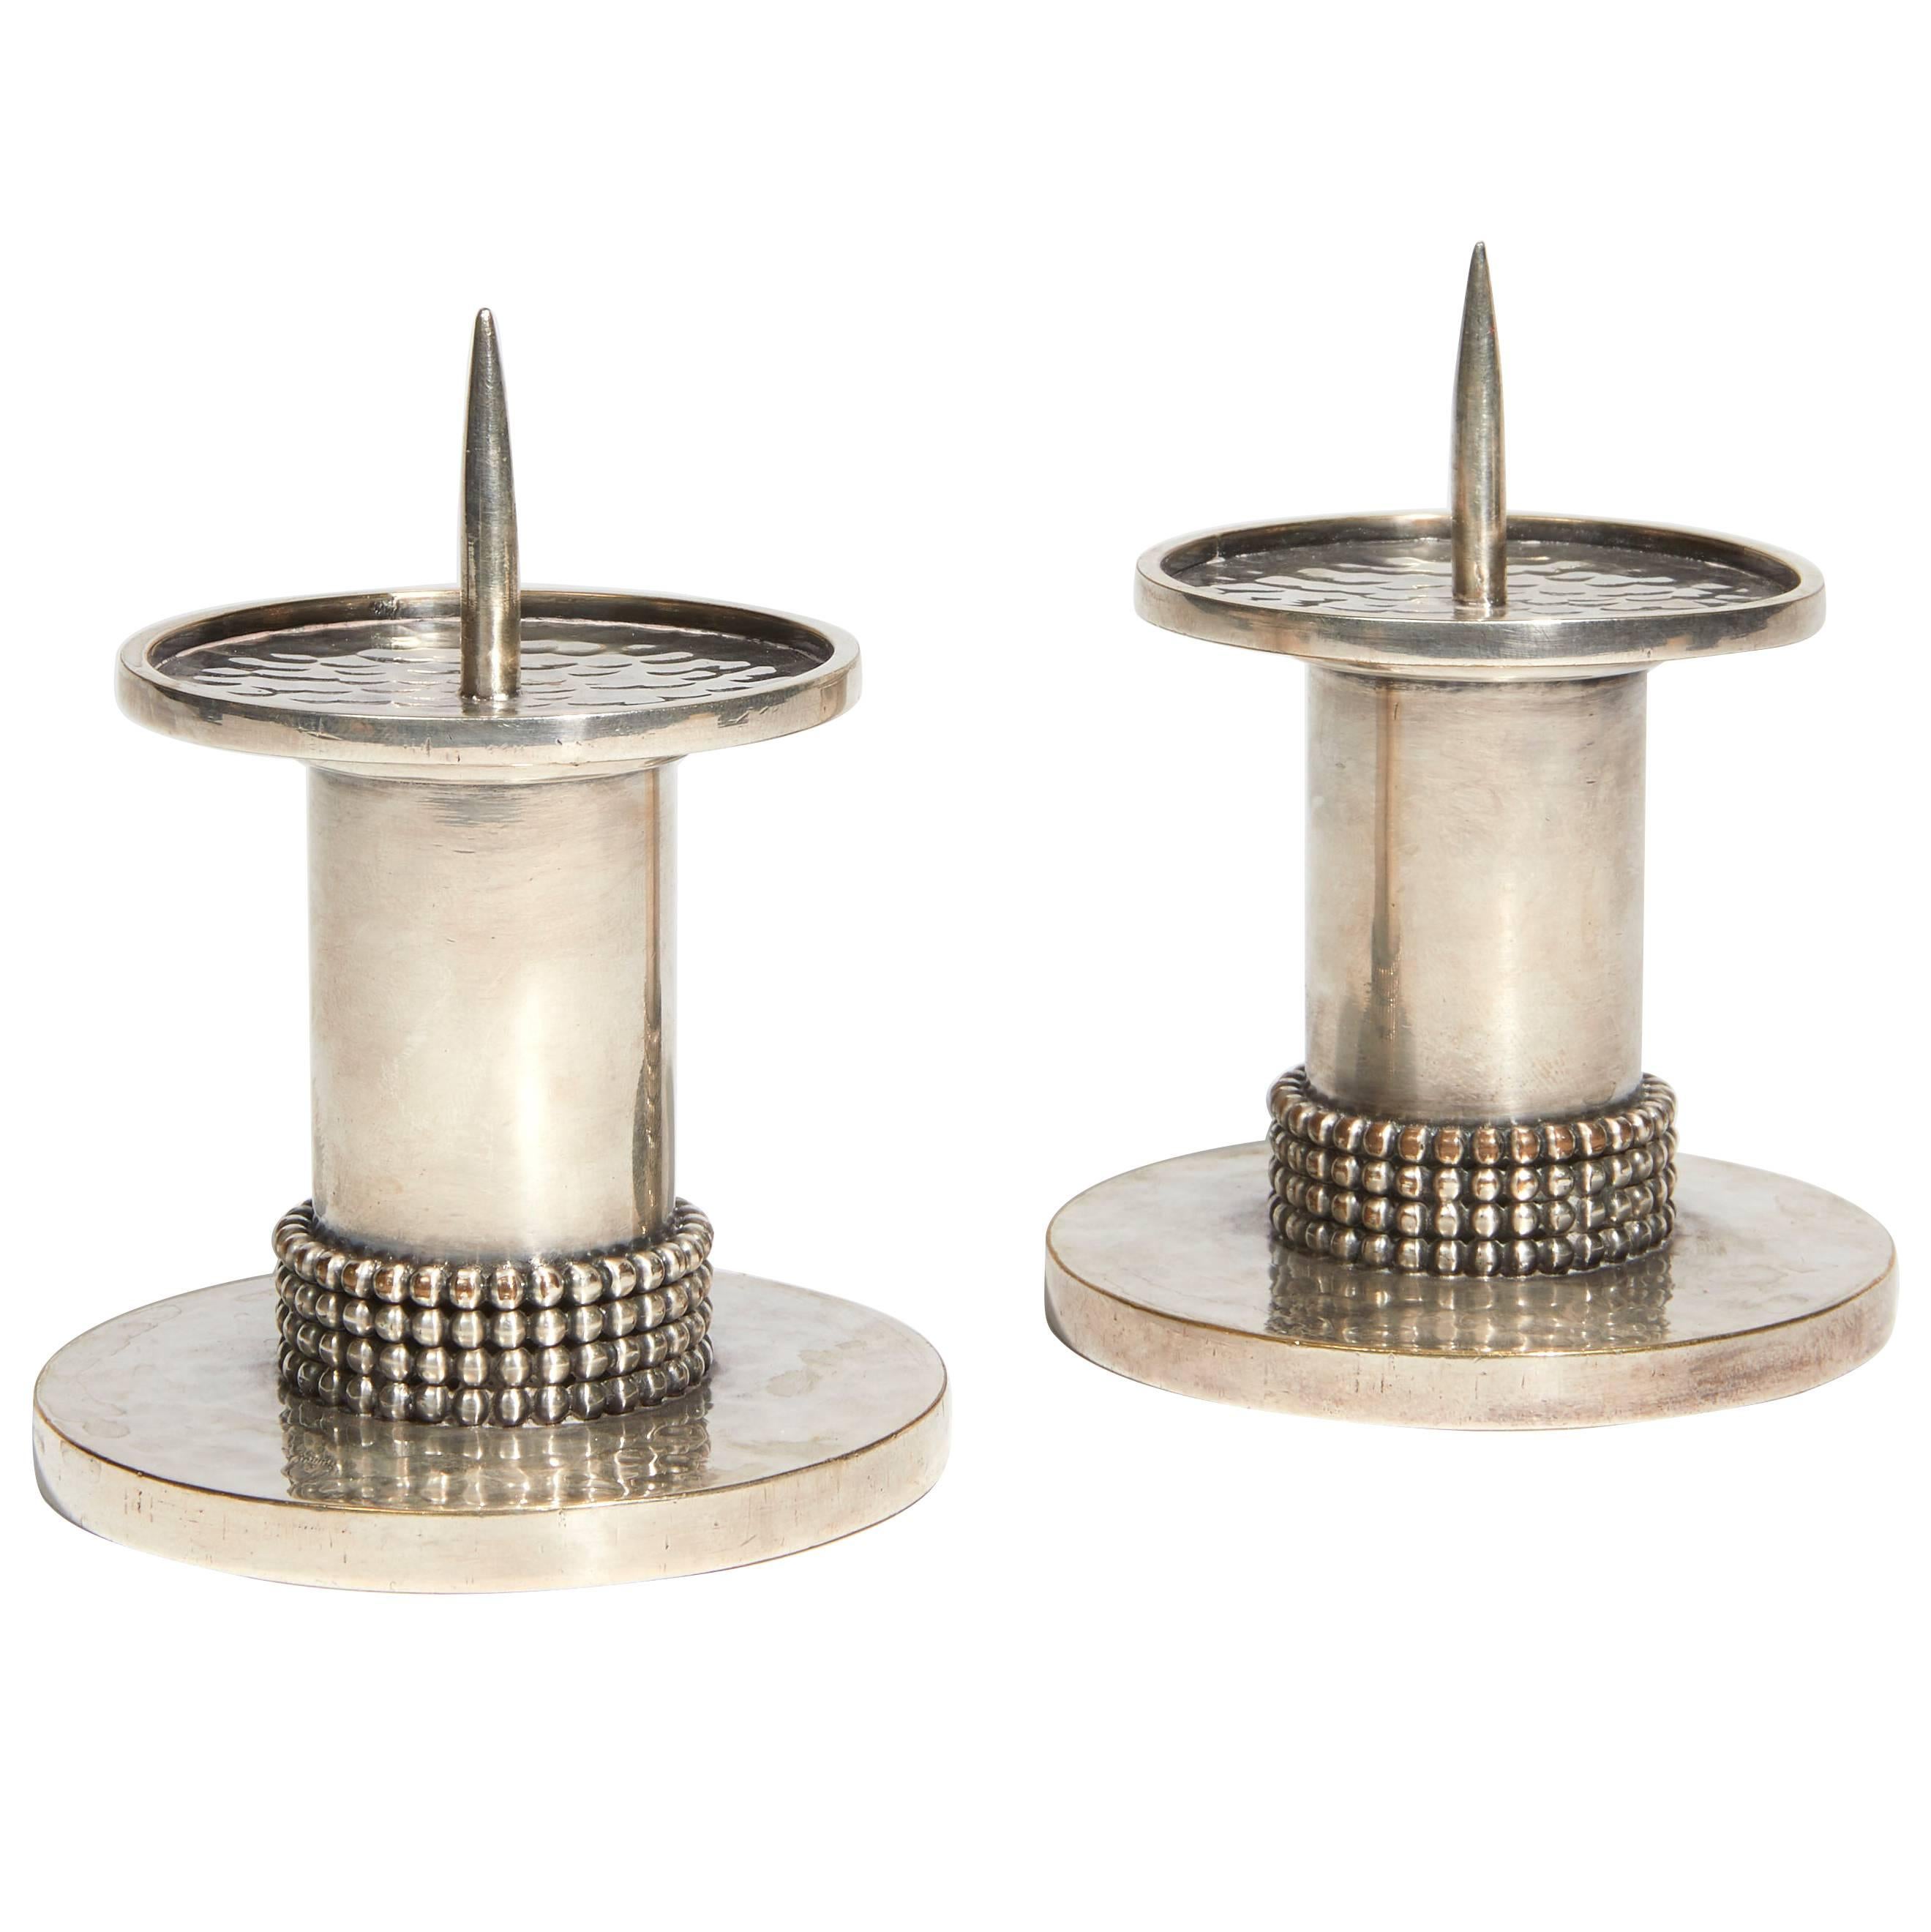 Pair of Candle Spikes